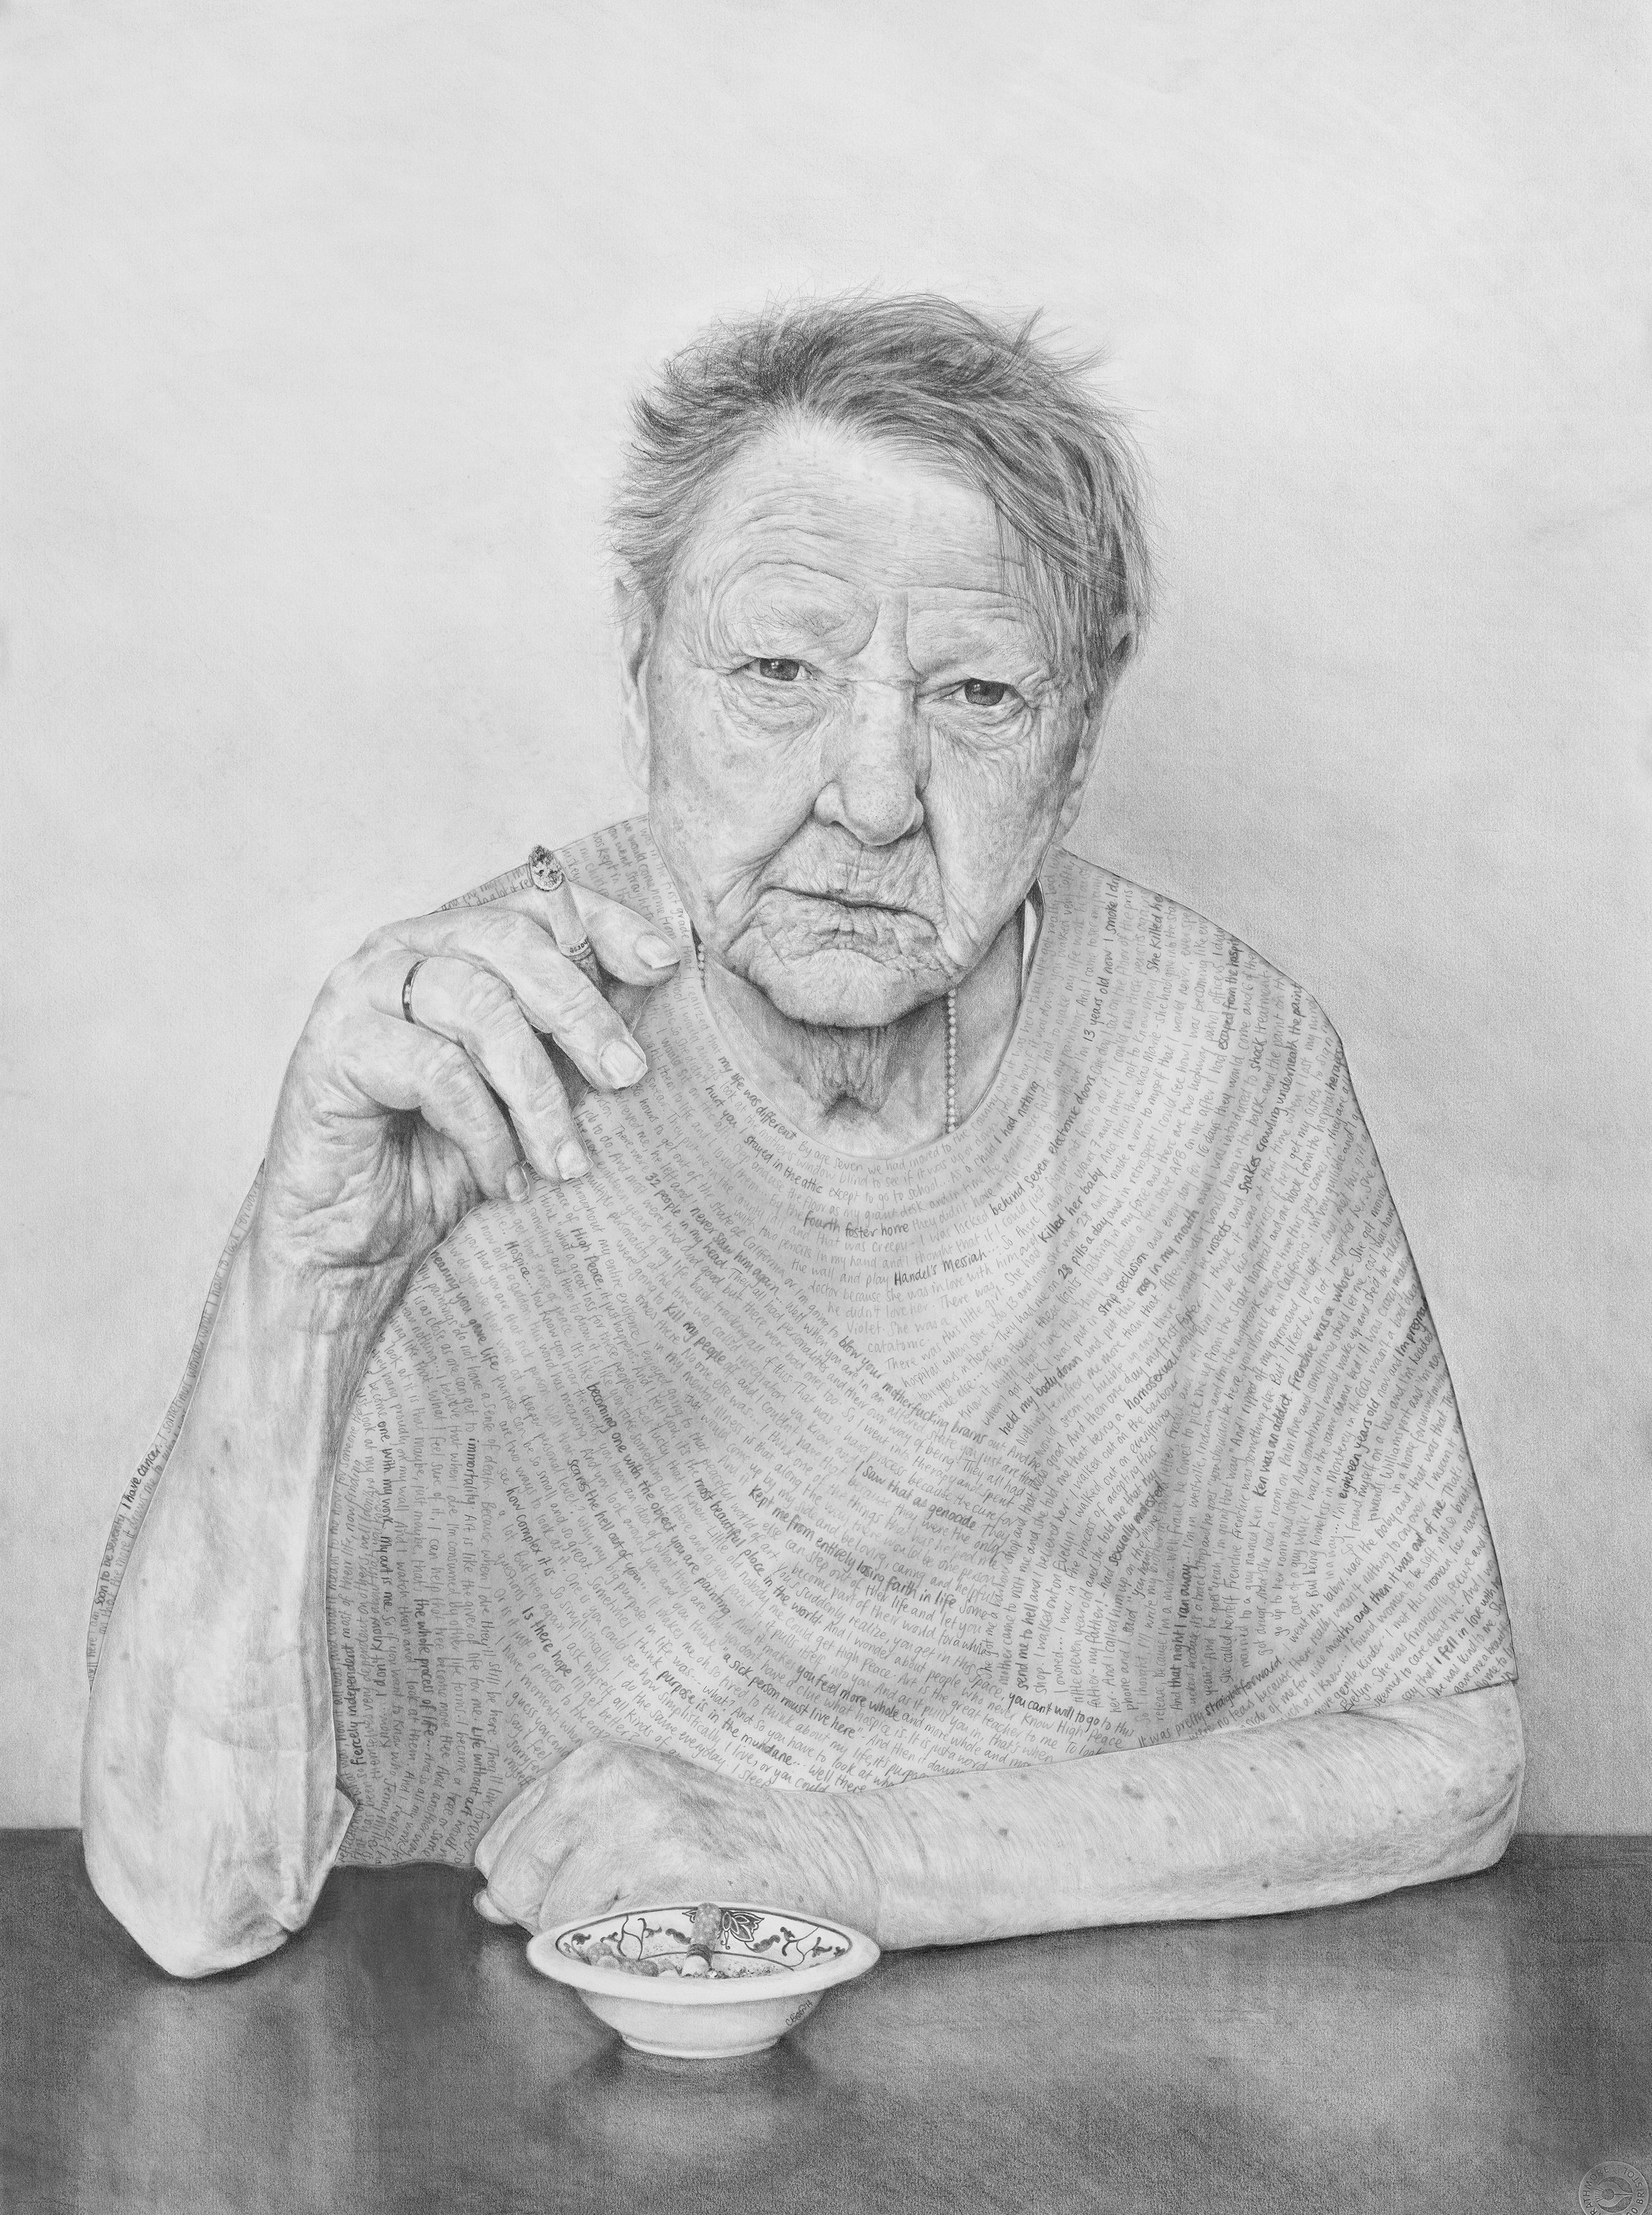 Jenny - Pencil on drawing and tissue papers - 30" x 22" - 2014